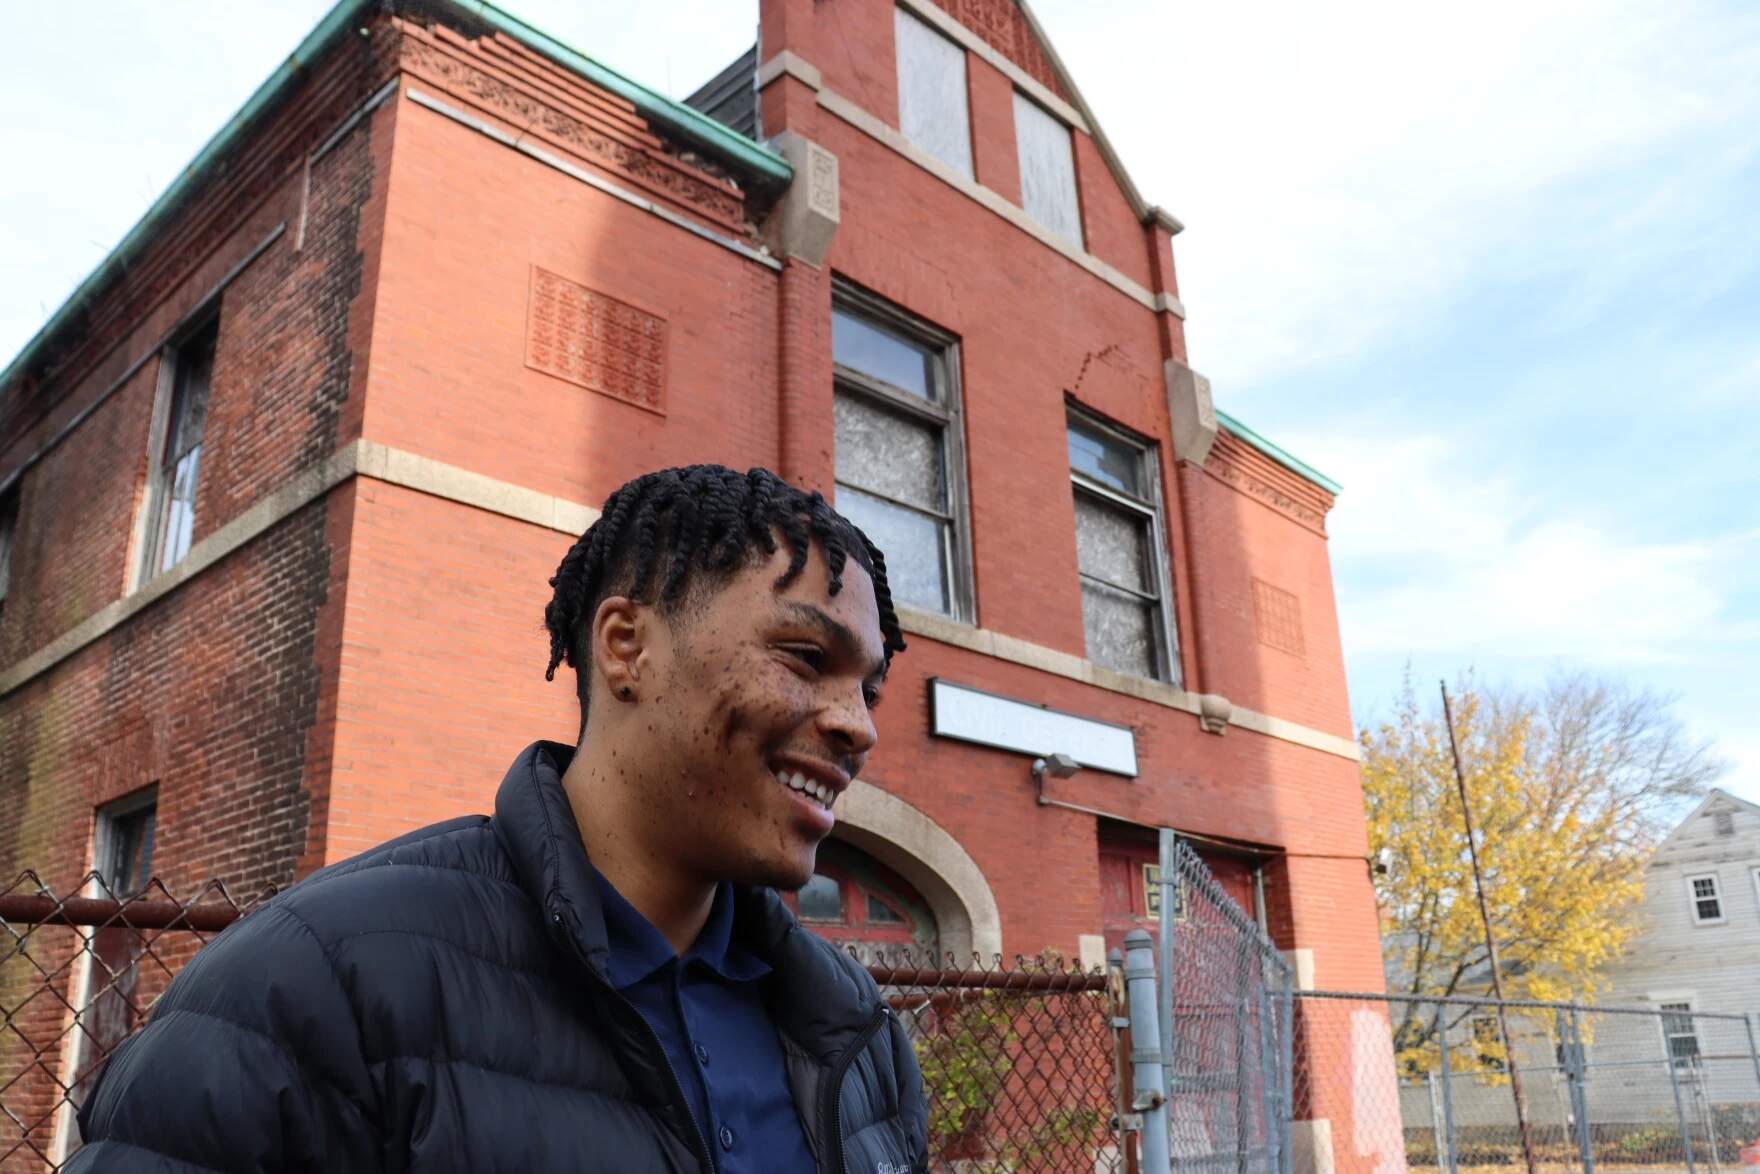 "The Hillman street firehouse may have been relatively unused in New Bedford for decades, but it now has a bright future within," said Senior Trey Turner. "We look forward to providing a sustainable model for attached housing in such a renowned location." (Eve Zuckoff/CAI)